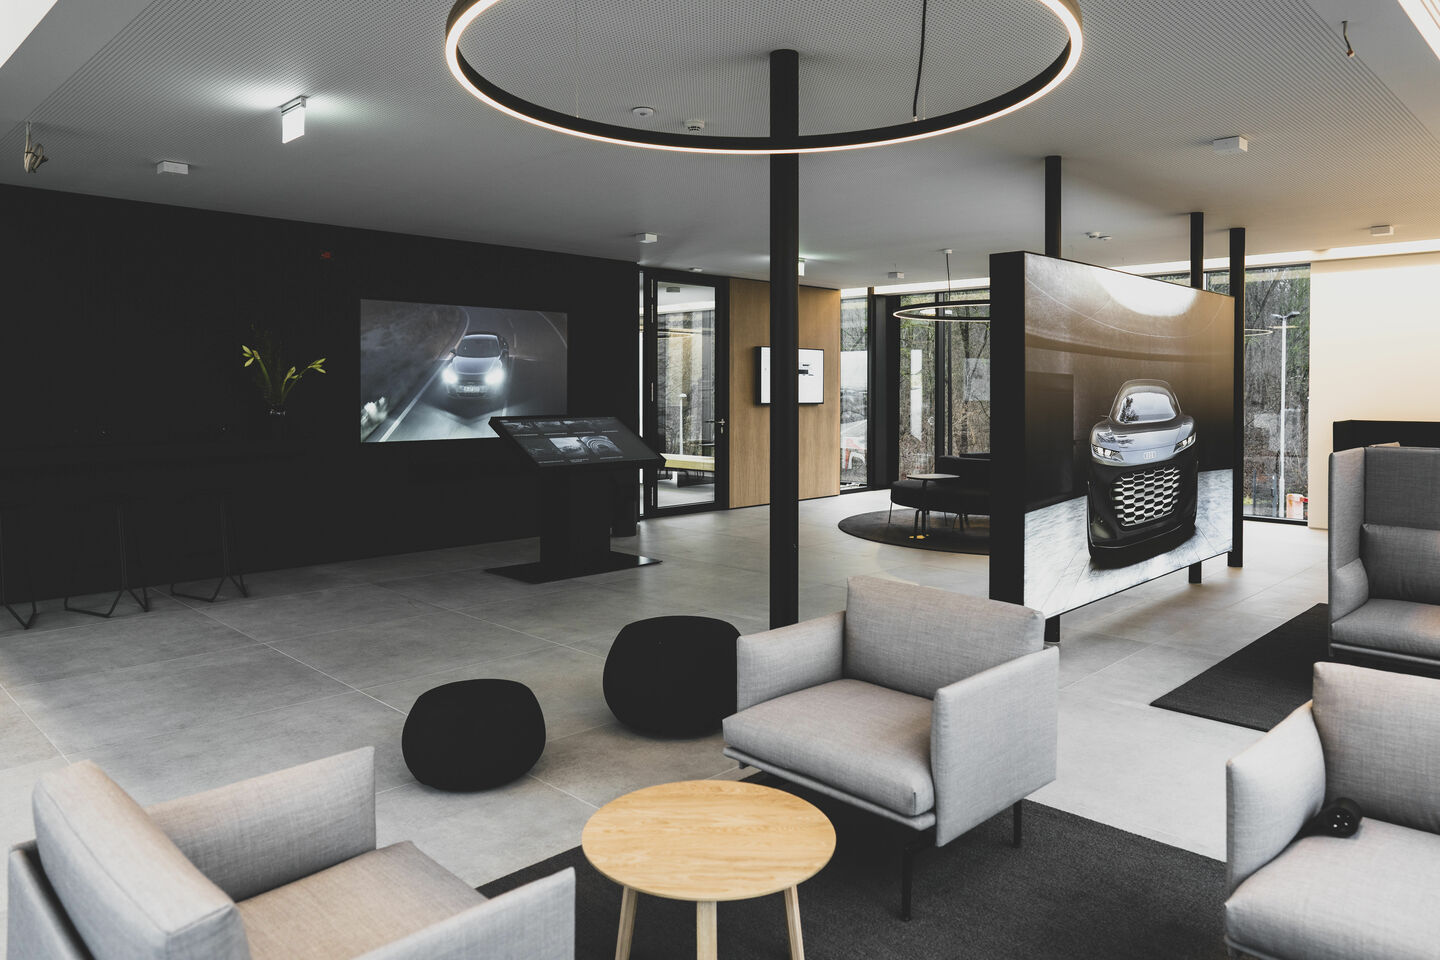 Porsche Taycan First Porsche Charging Lounge opens in Germany A218865_web_1440